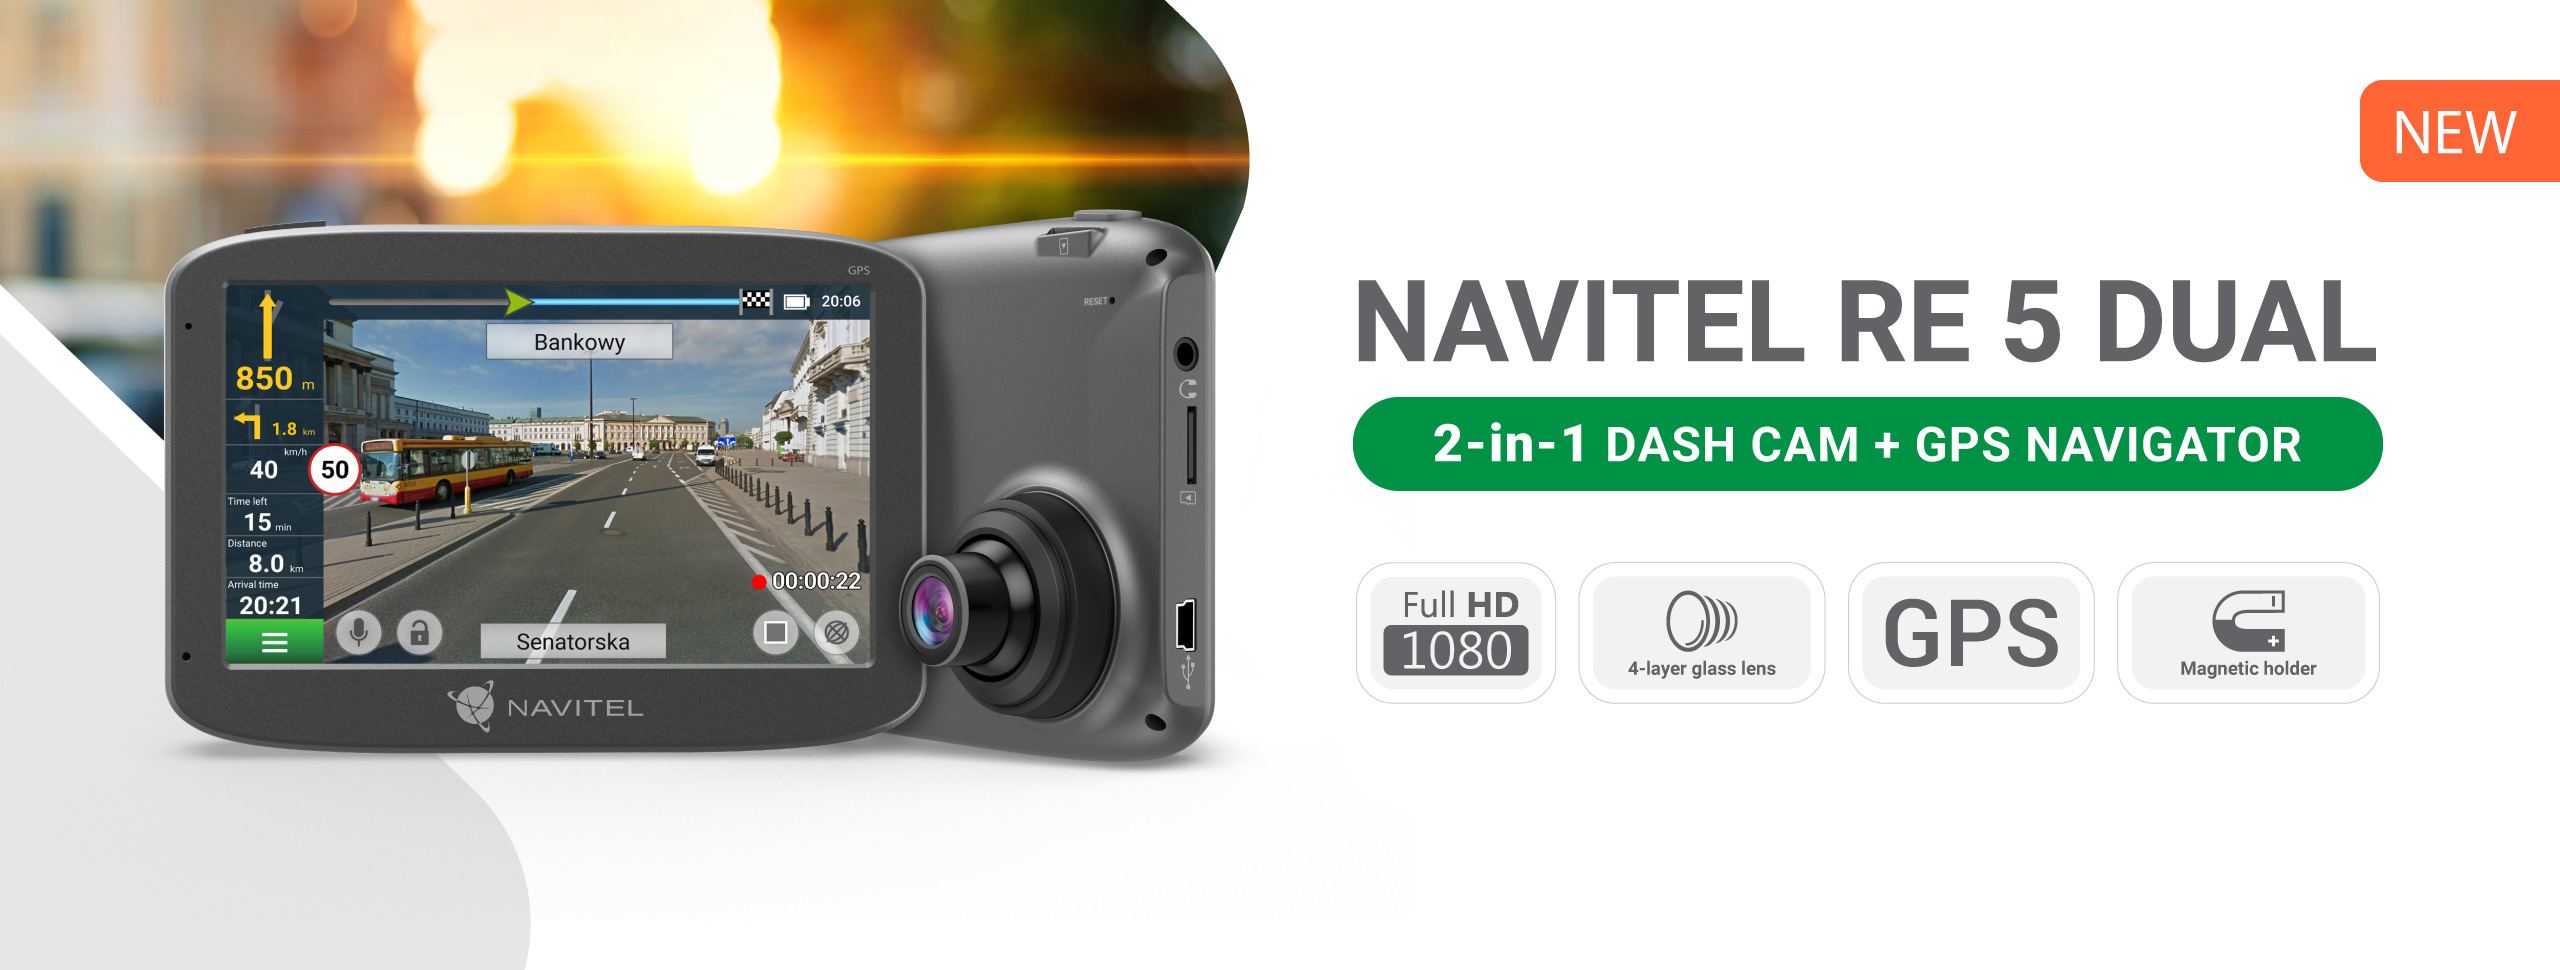 NAVITEL RE 5 Dual is a new 2-in-1 device